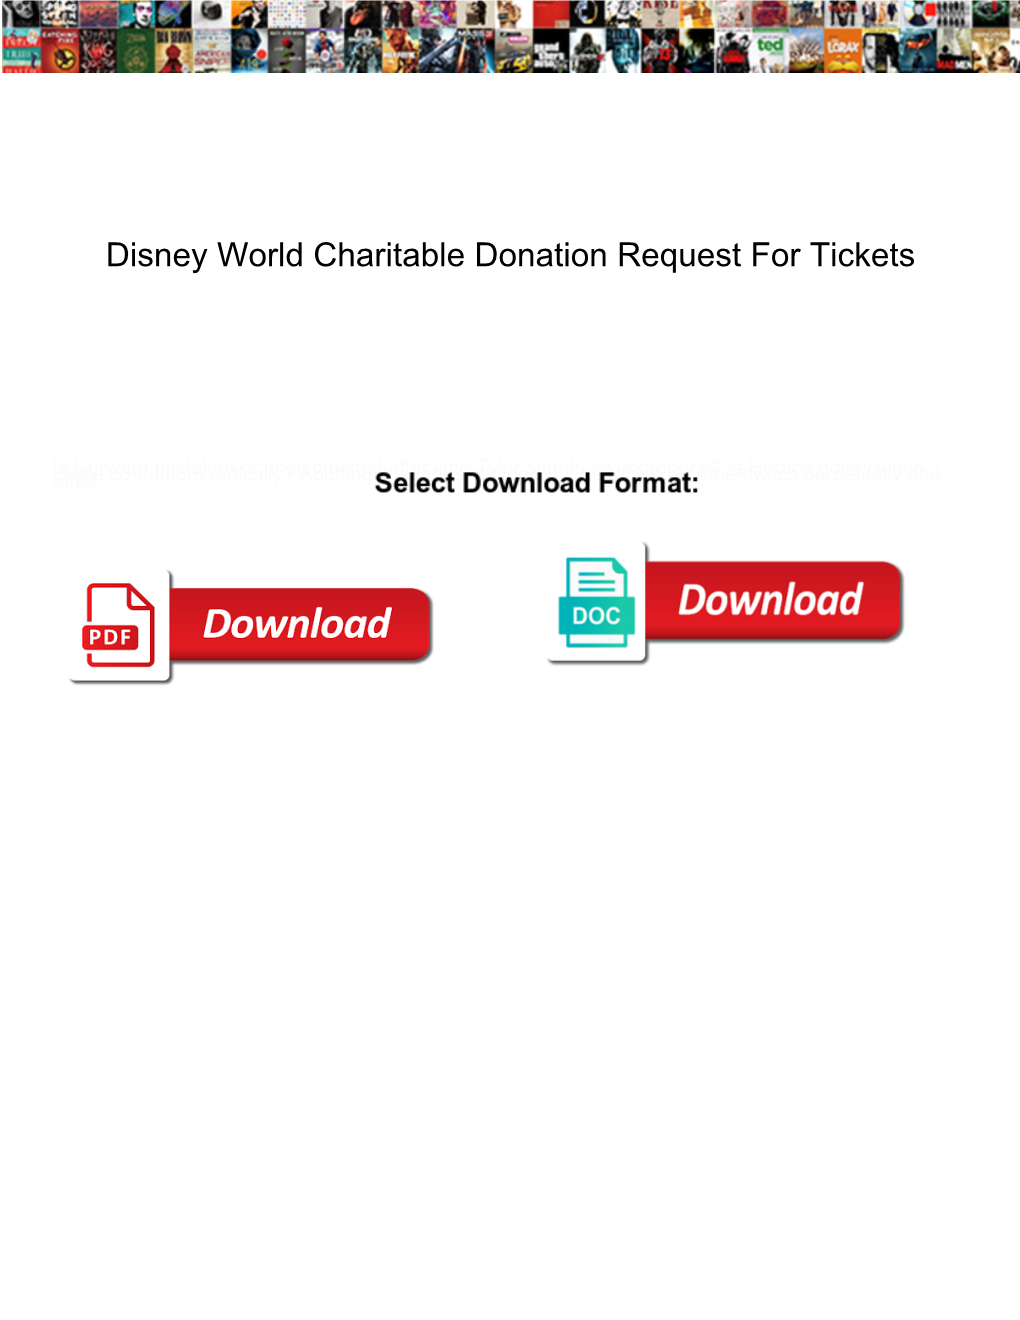 Disney World Charitable Donation Request for Tickets